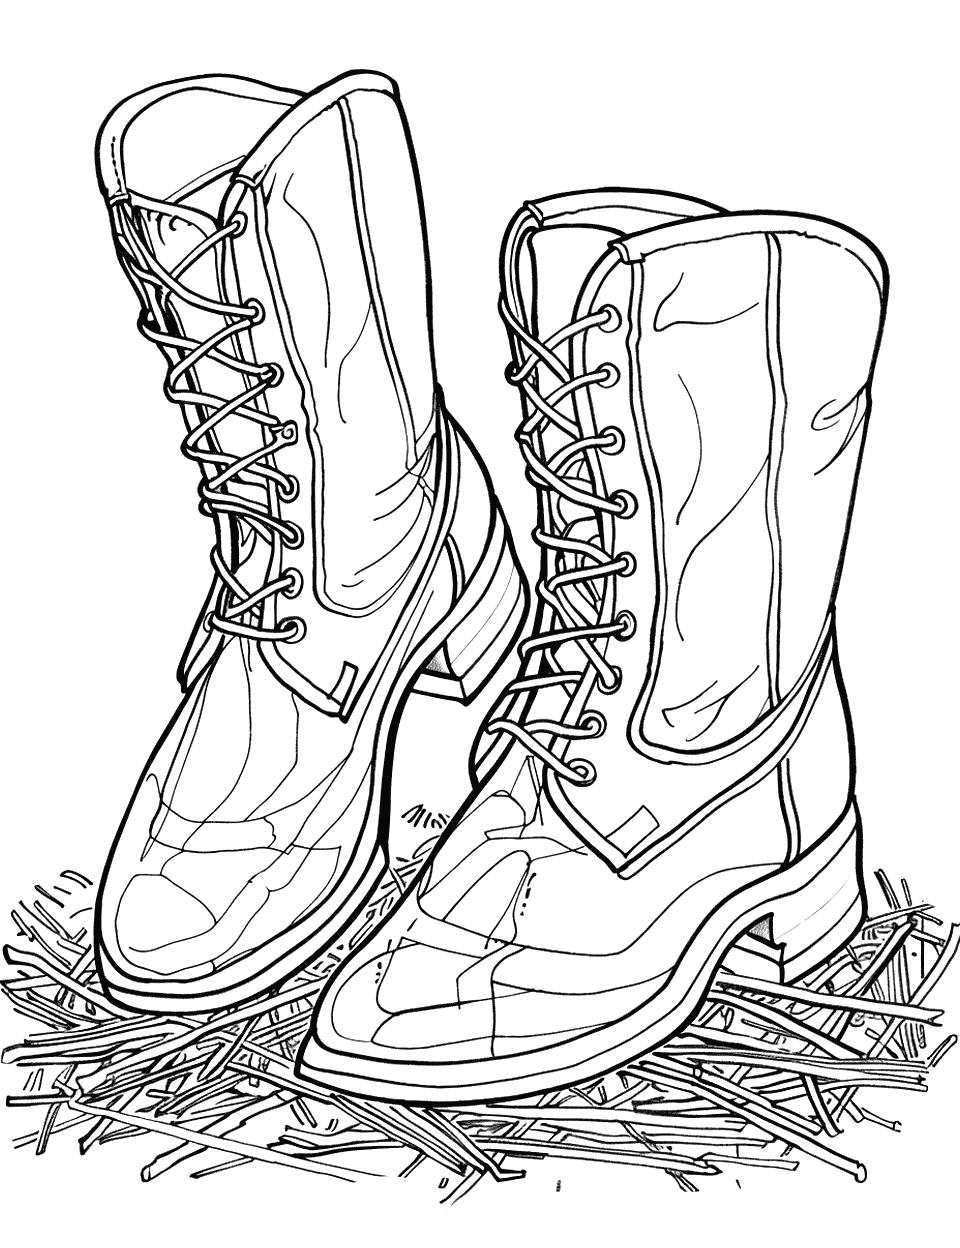 Horse Riding Boots at the Stable Shoe Coloring Page - Polished riding boots with bits of hay around.